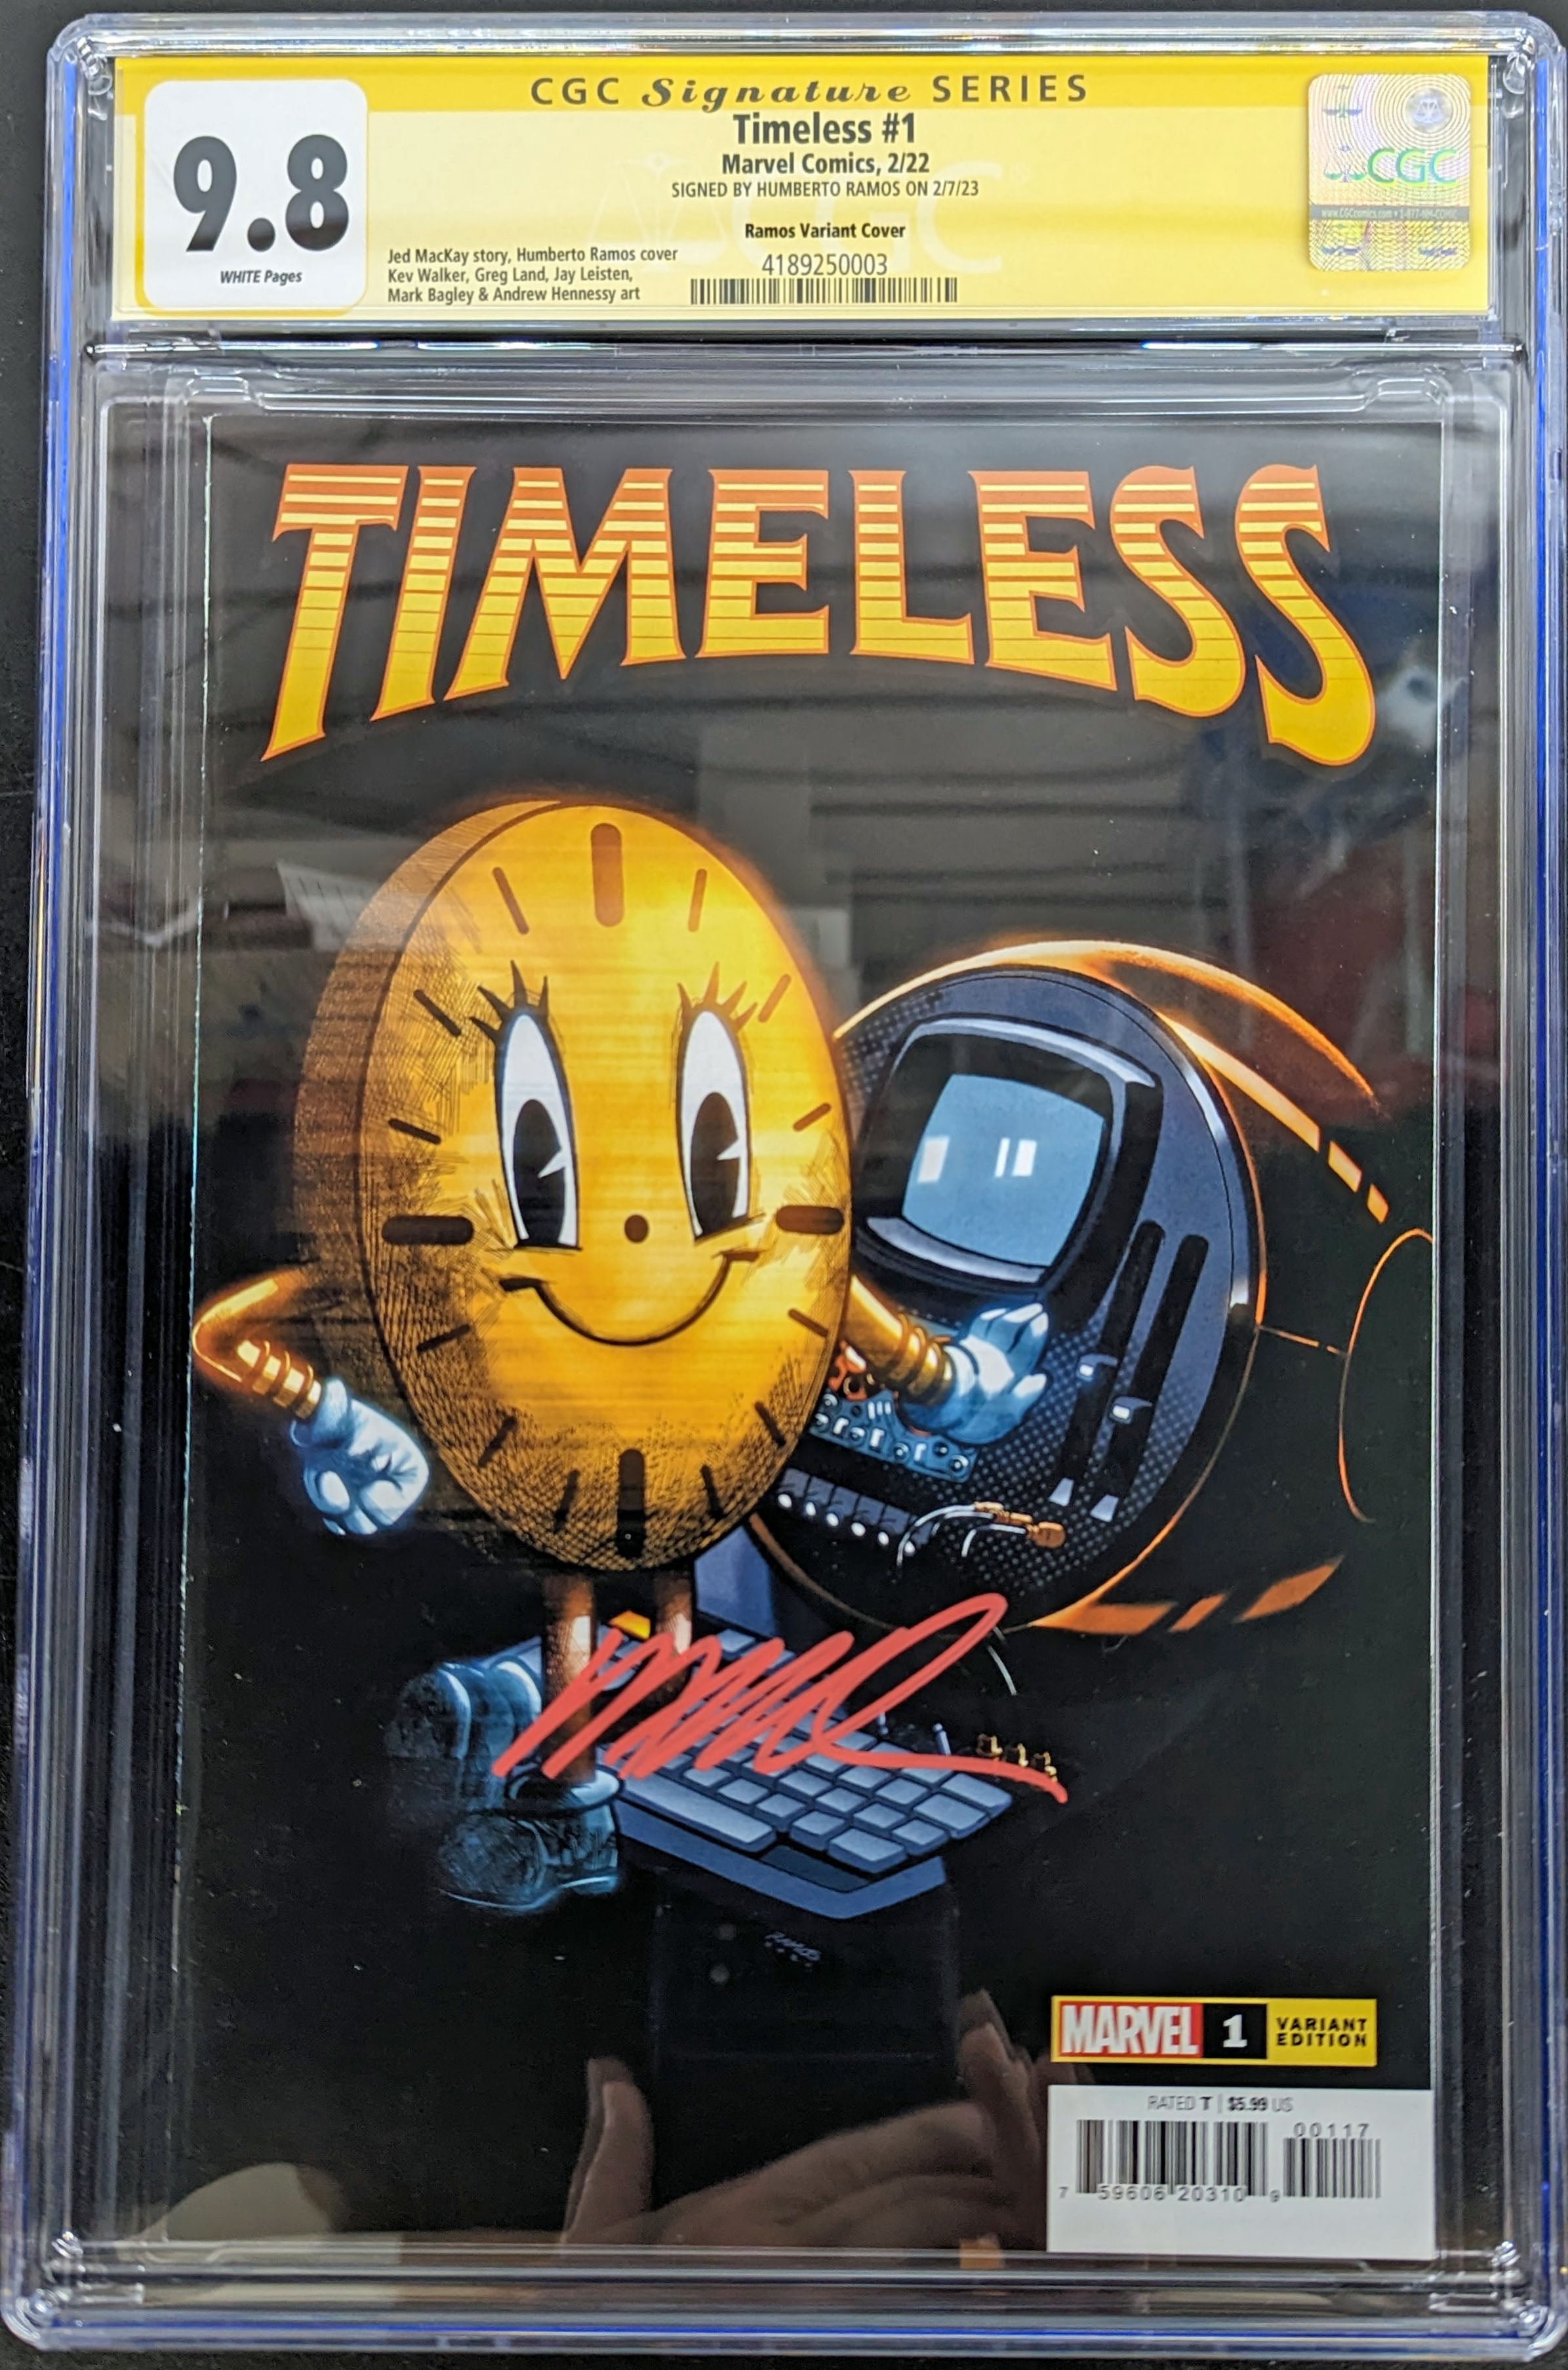 Timeless #1 Miss Minutes Variant CGC 9.8 Signed by Humberto Ramos